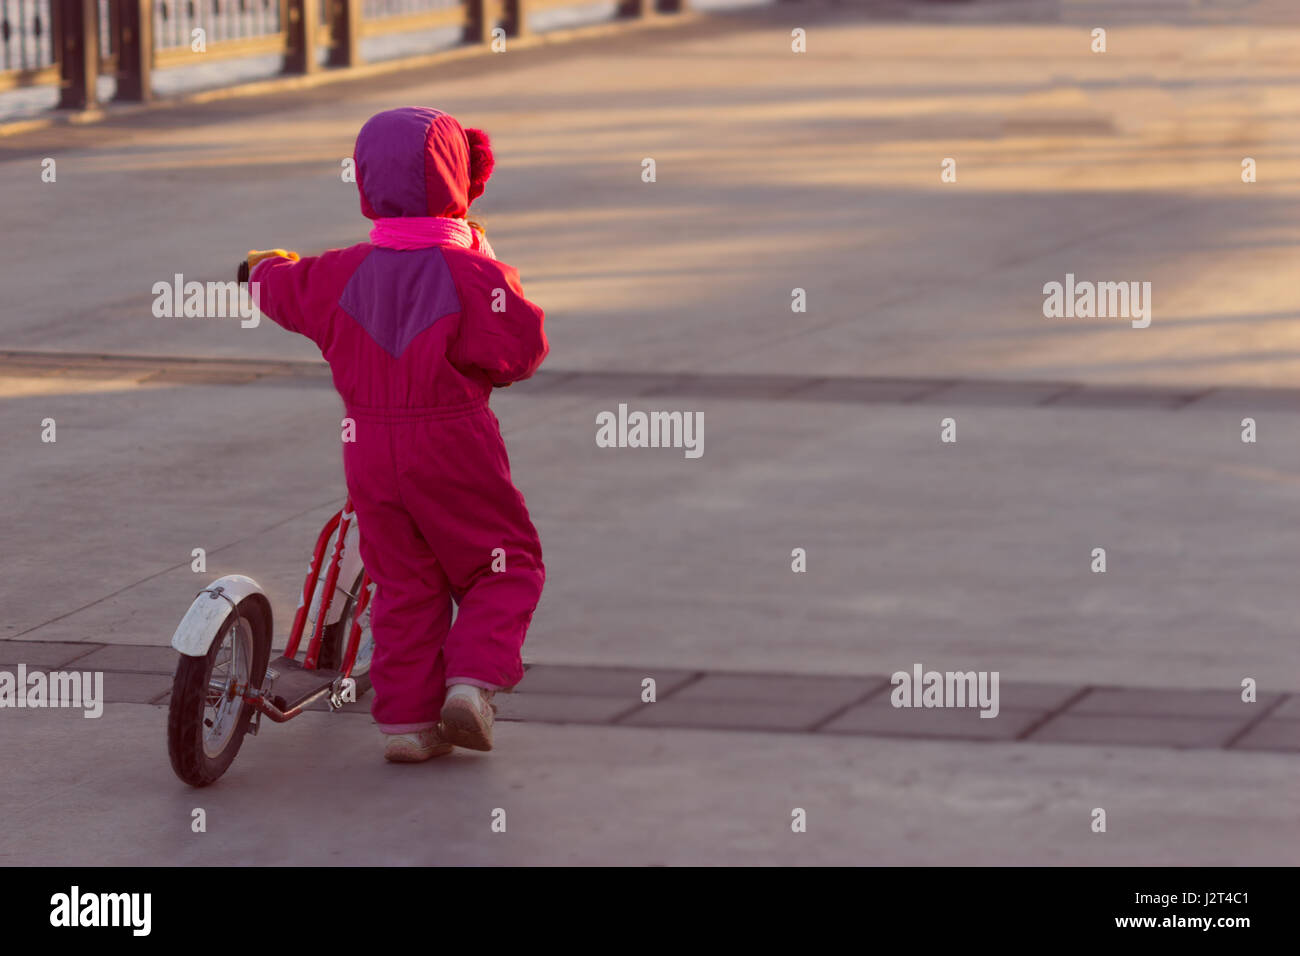 Happy child riding a bike. Little girl on a pink bicycle. Stock Photo